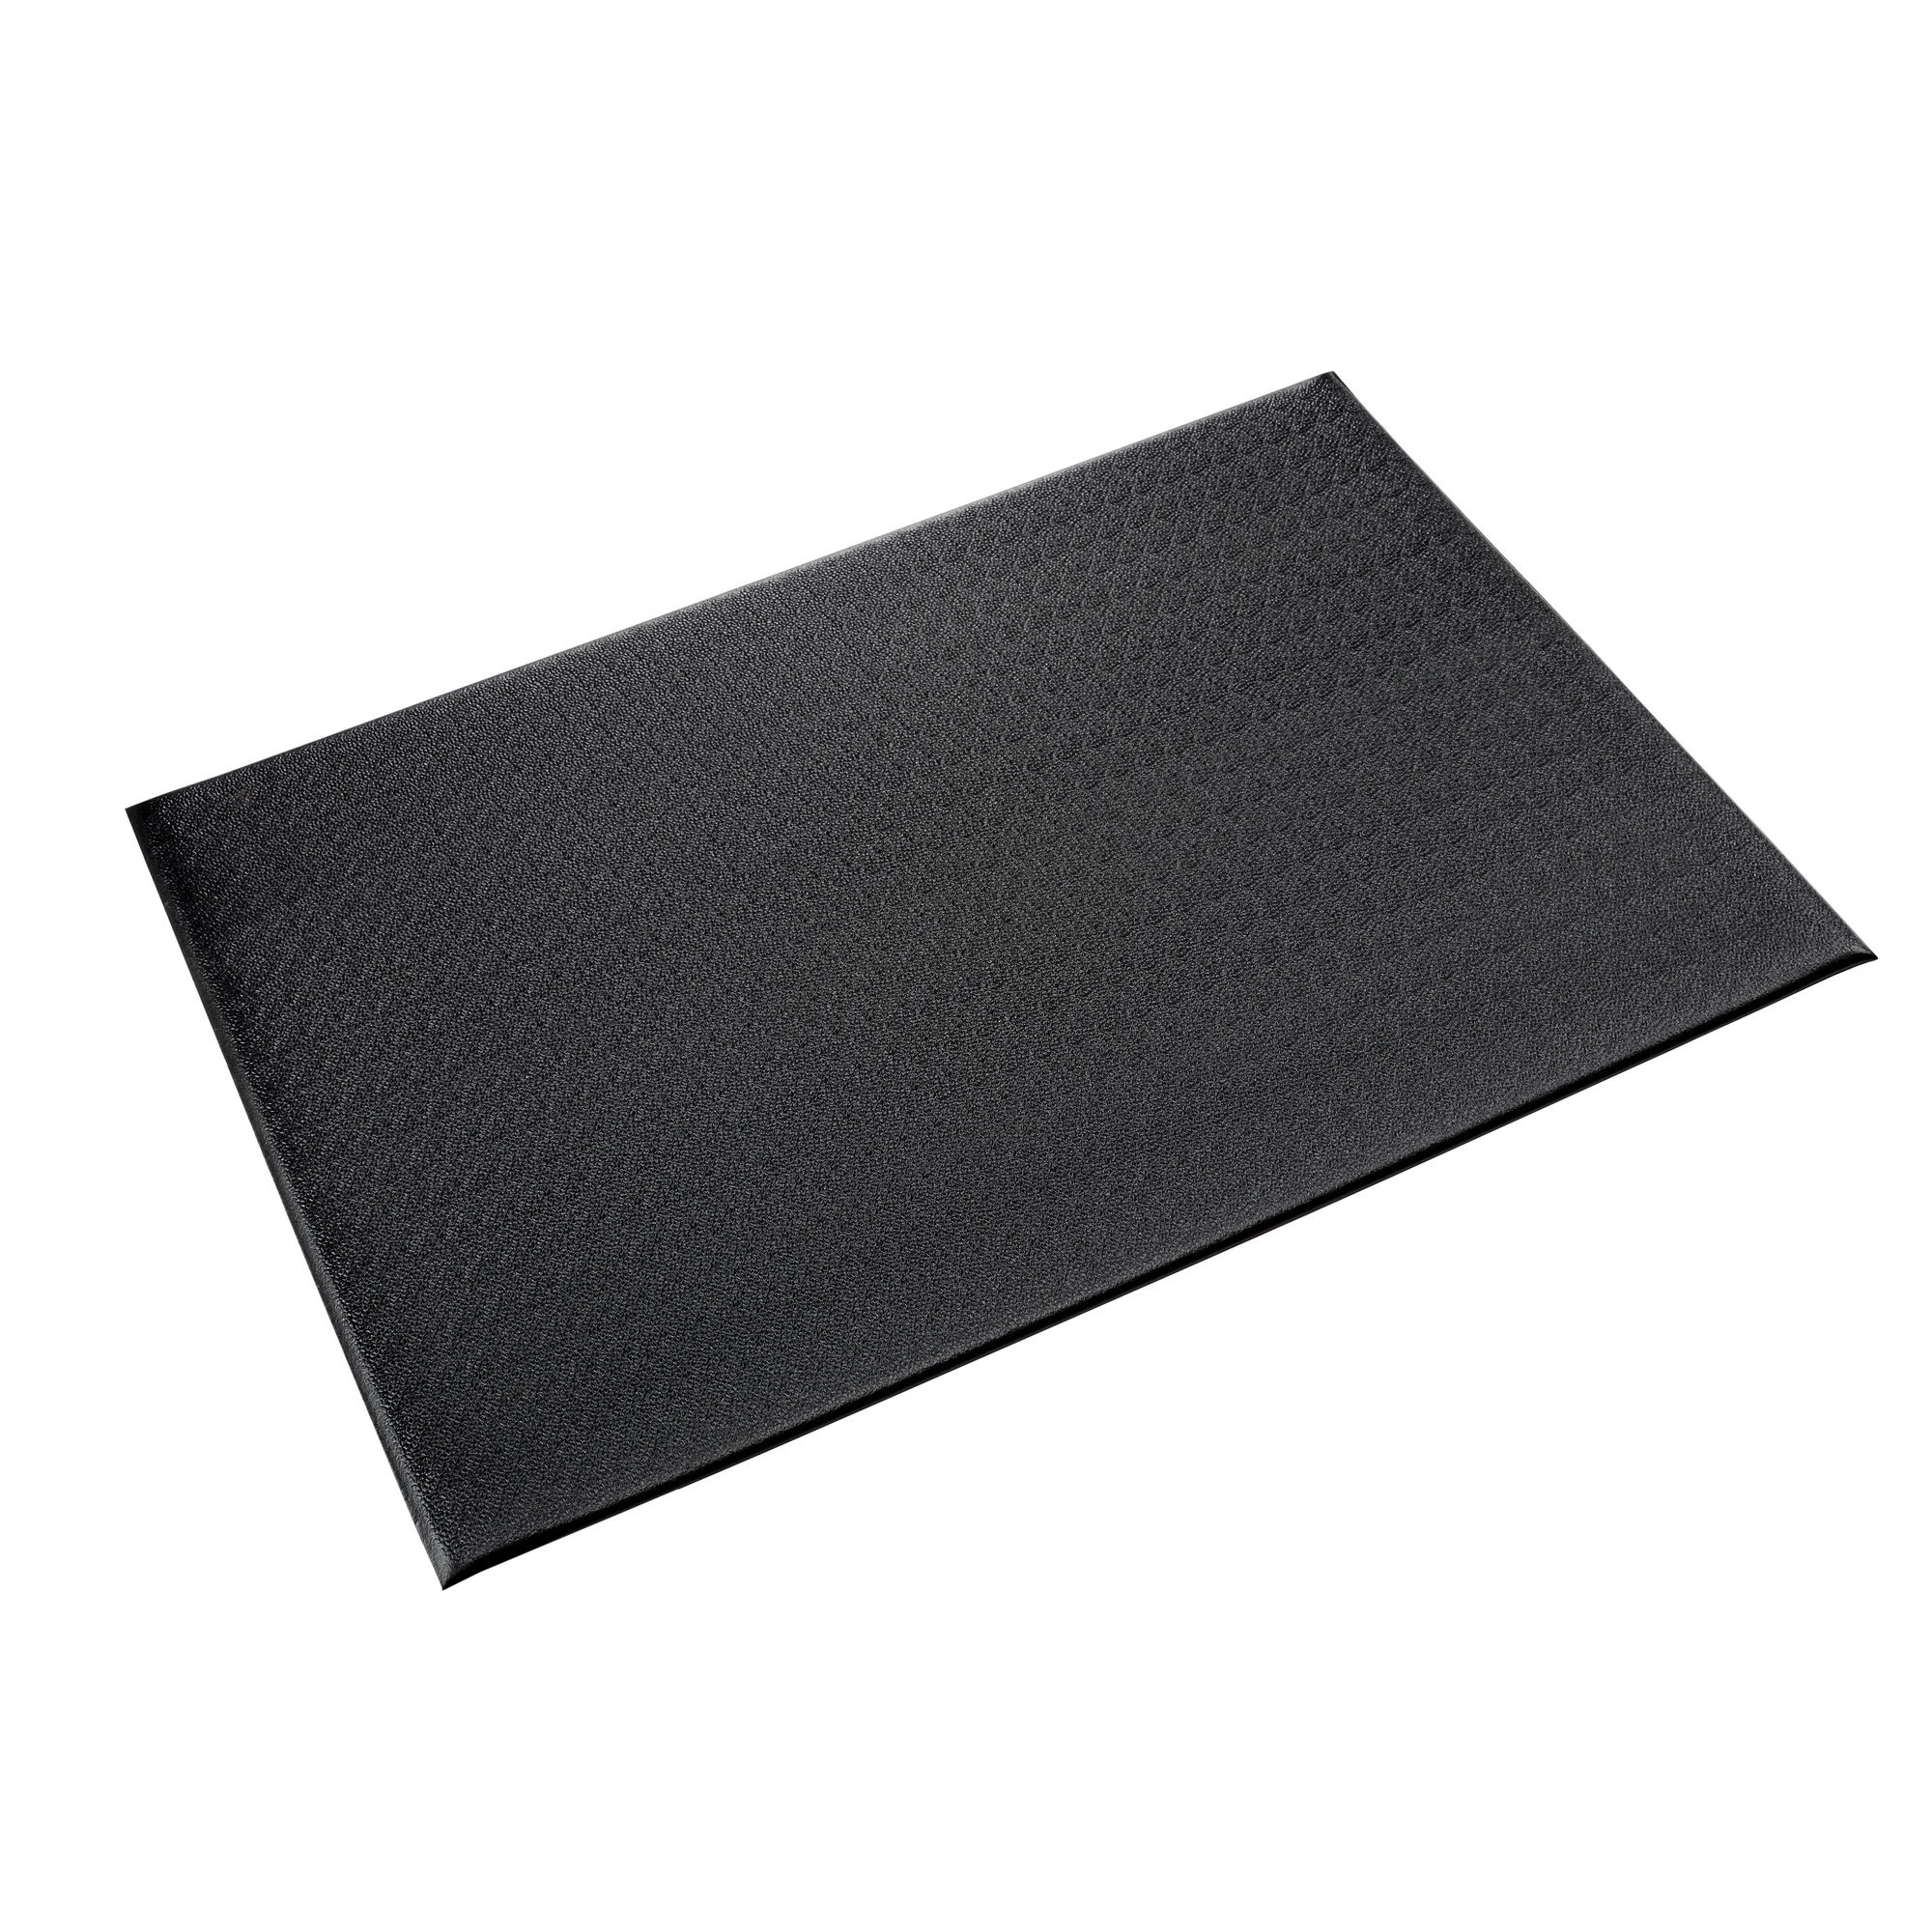 Crown Matting Technologies, Comfort-King 1/2 3ft.x12ft. Black, Width 36 in, Length 144 in, Thickness 1/2 in, Model K4 0312BK